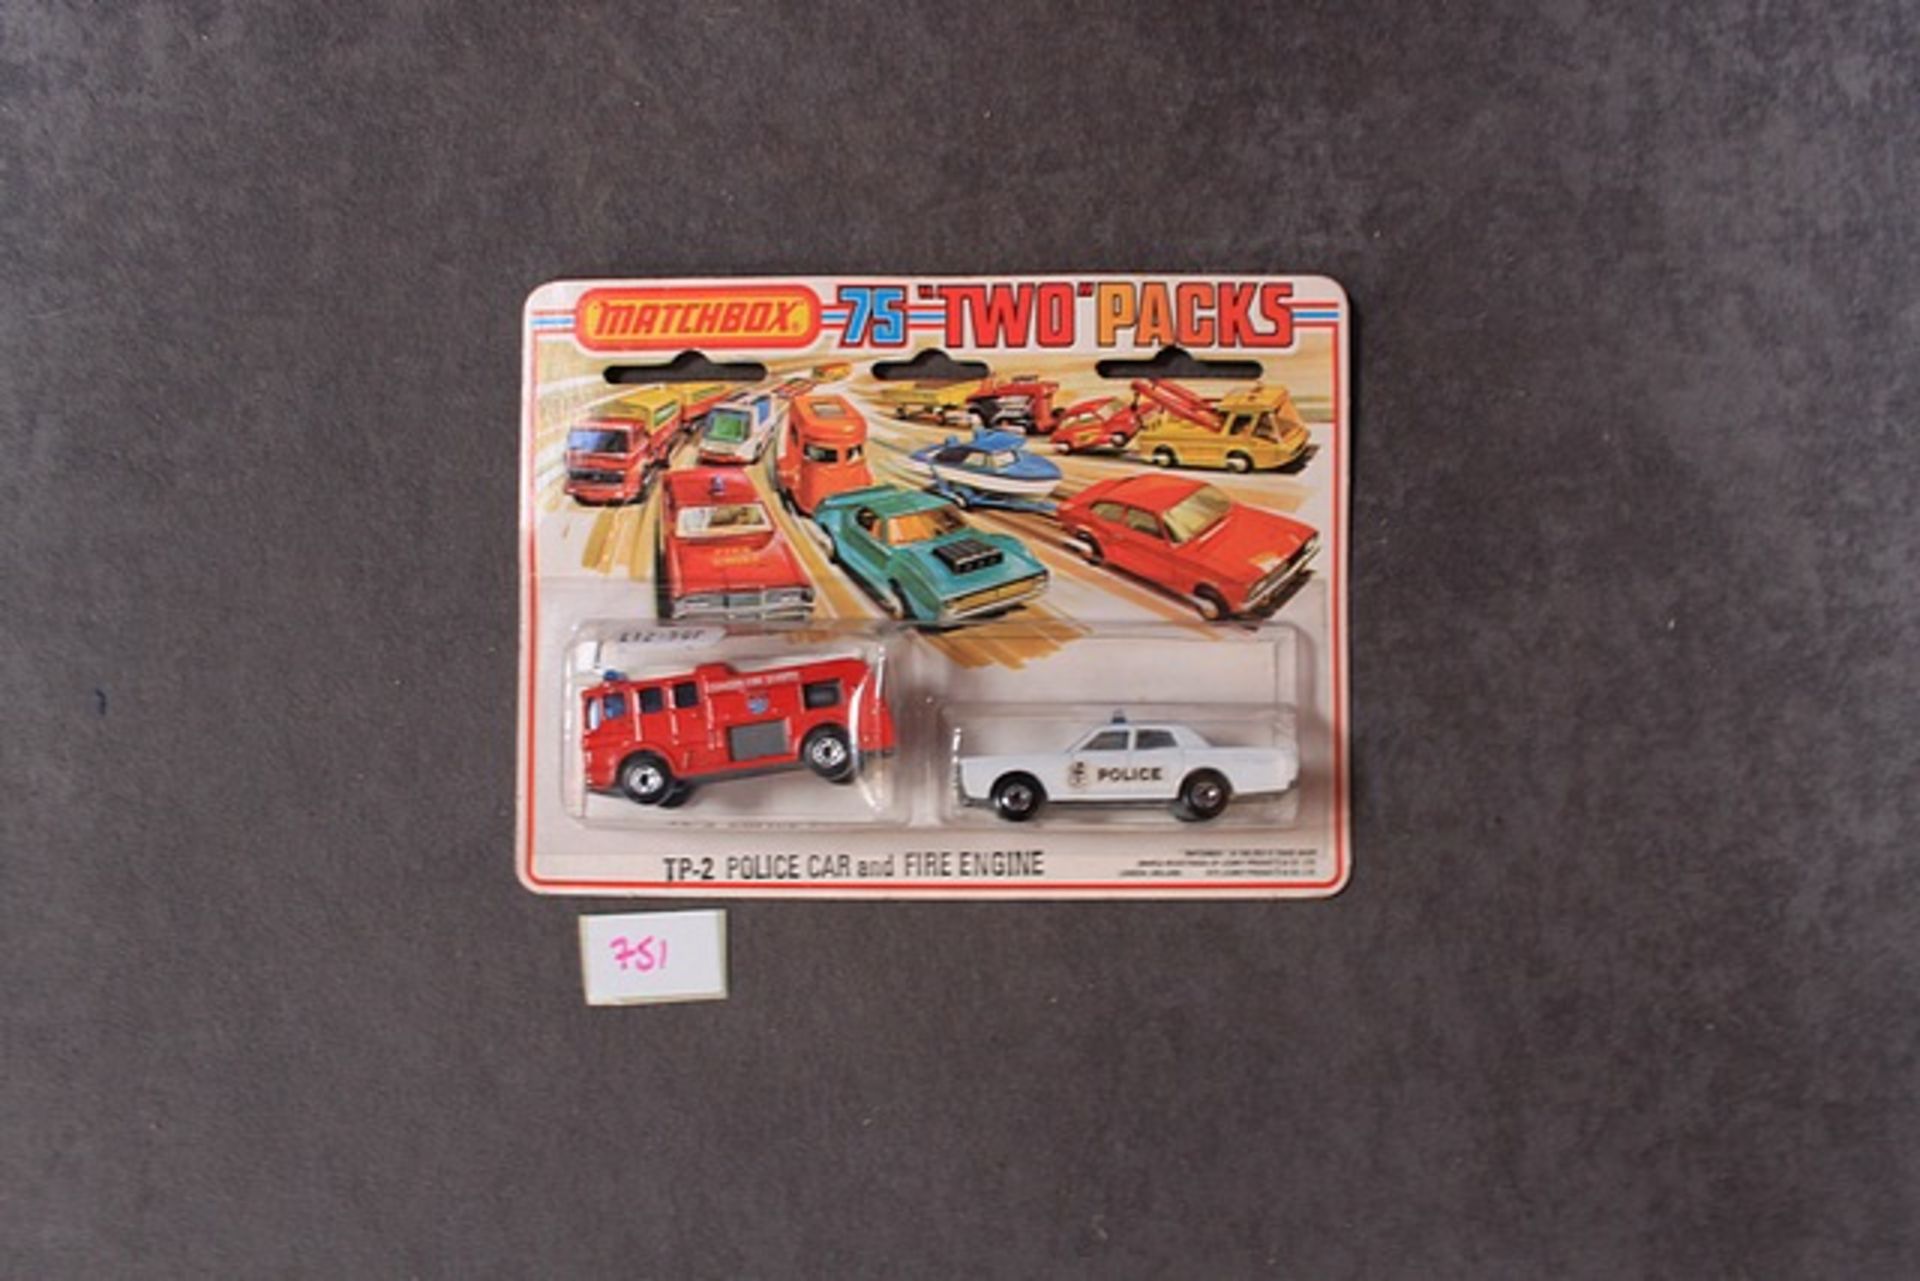 Matchbox 75 Two Packs Superfast Diecast Models # TP-2 Police Car & Fire Engine On Card